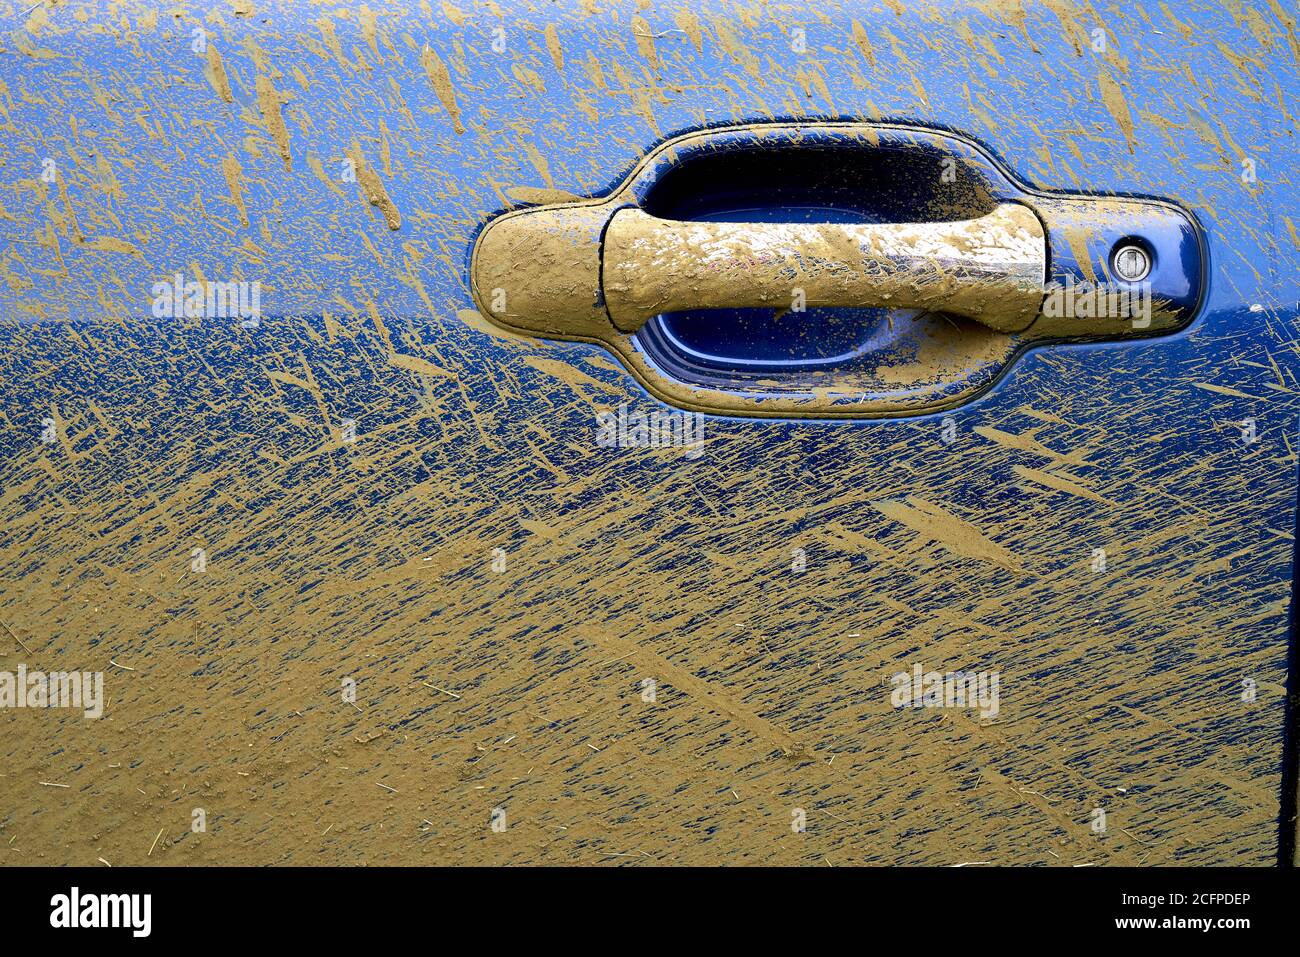 Silver car door handle on a blue automobile covered in mud spatter Stock Photo